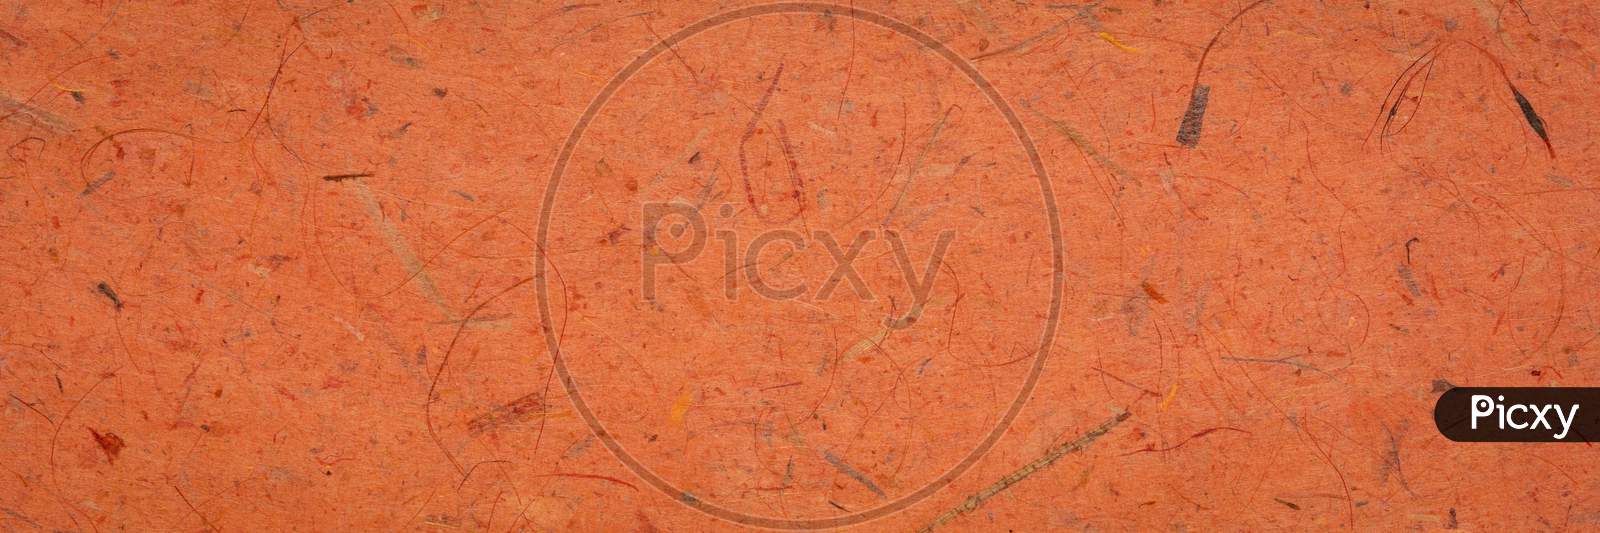 Background Of Sienna Thai Banana Paper With Heavy Banana Bark Inclusions, Web Banner